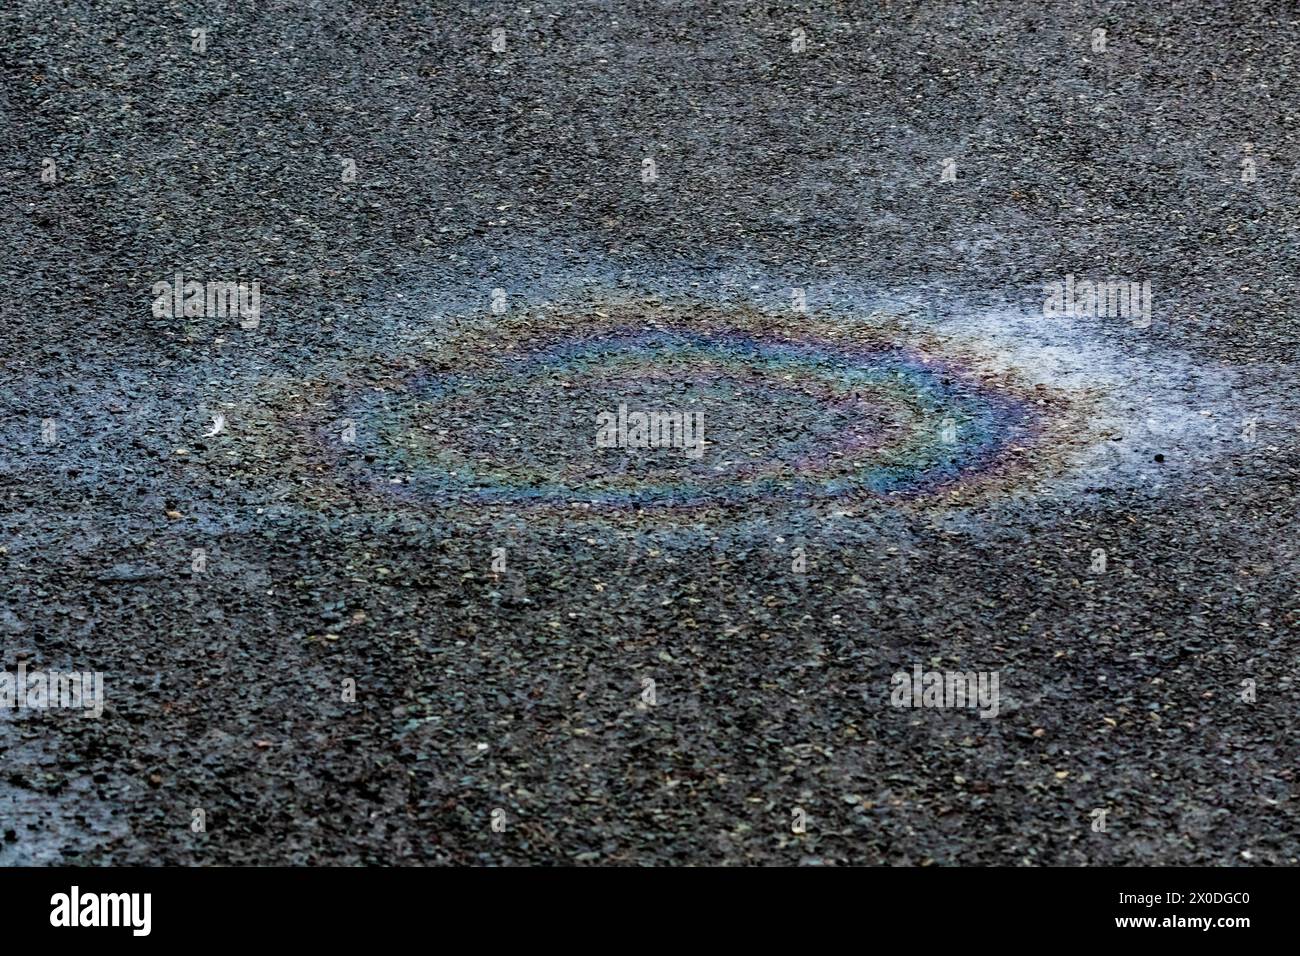 An oil patch on a tarmac road. The oil spillage creates an oil rainbow when light is reflected off it. Stock Photo